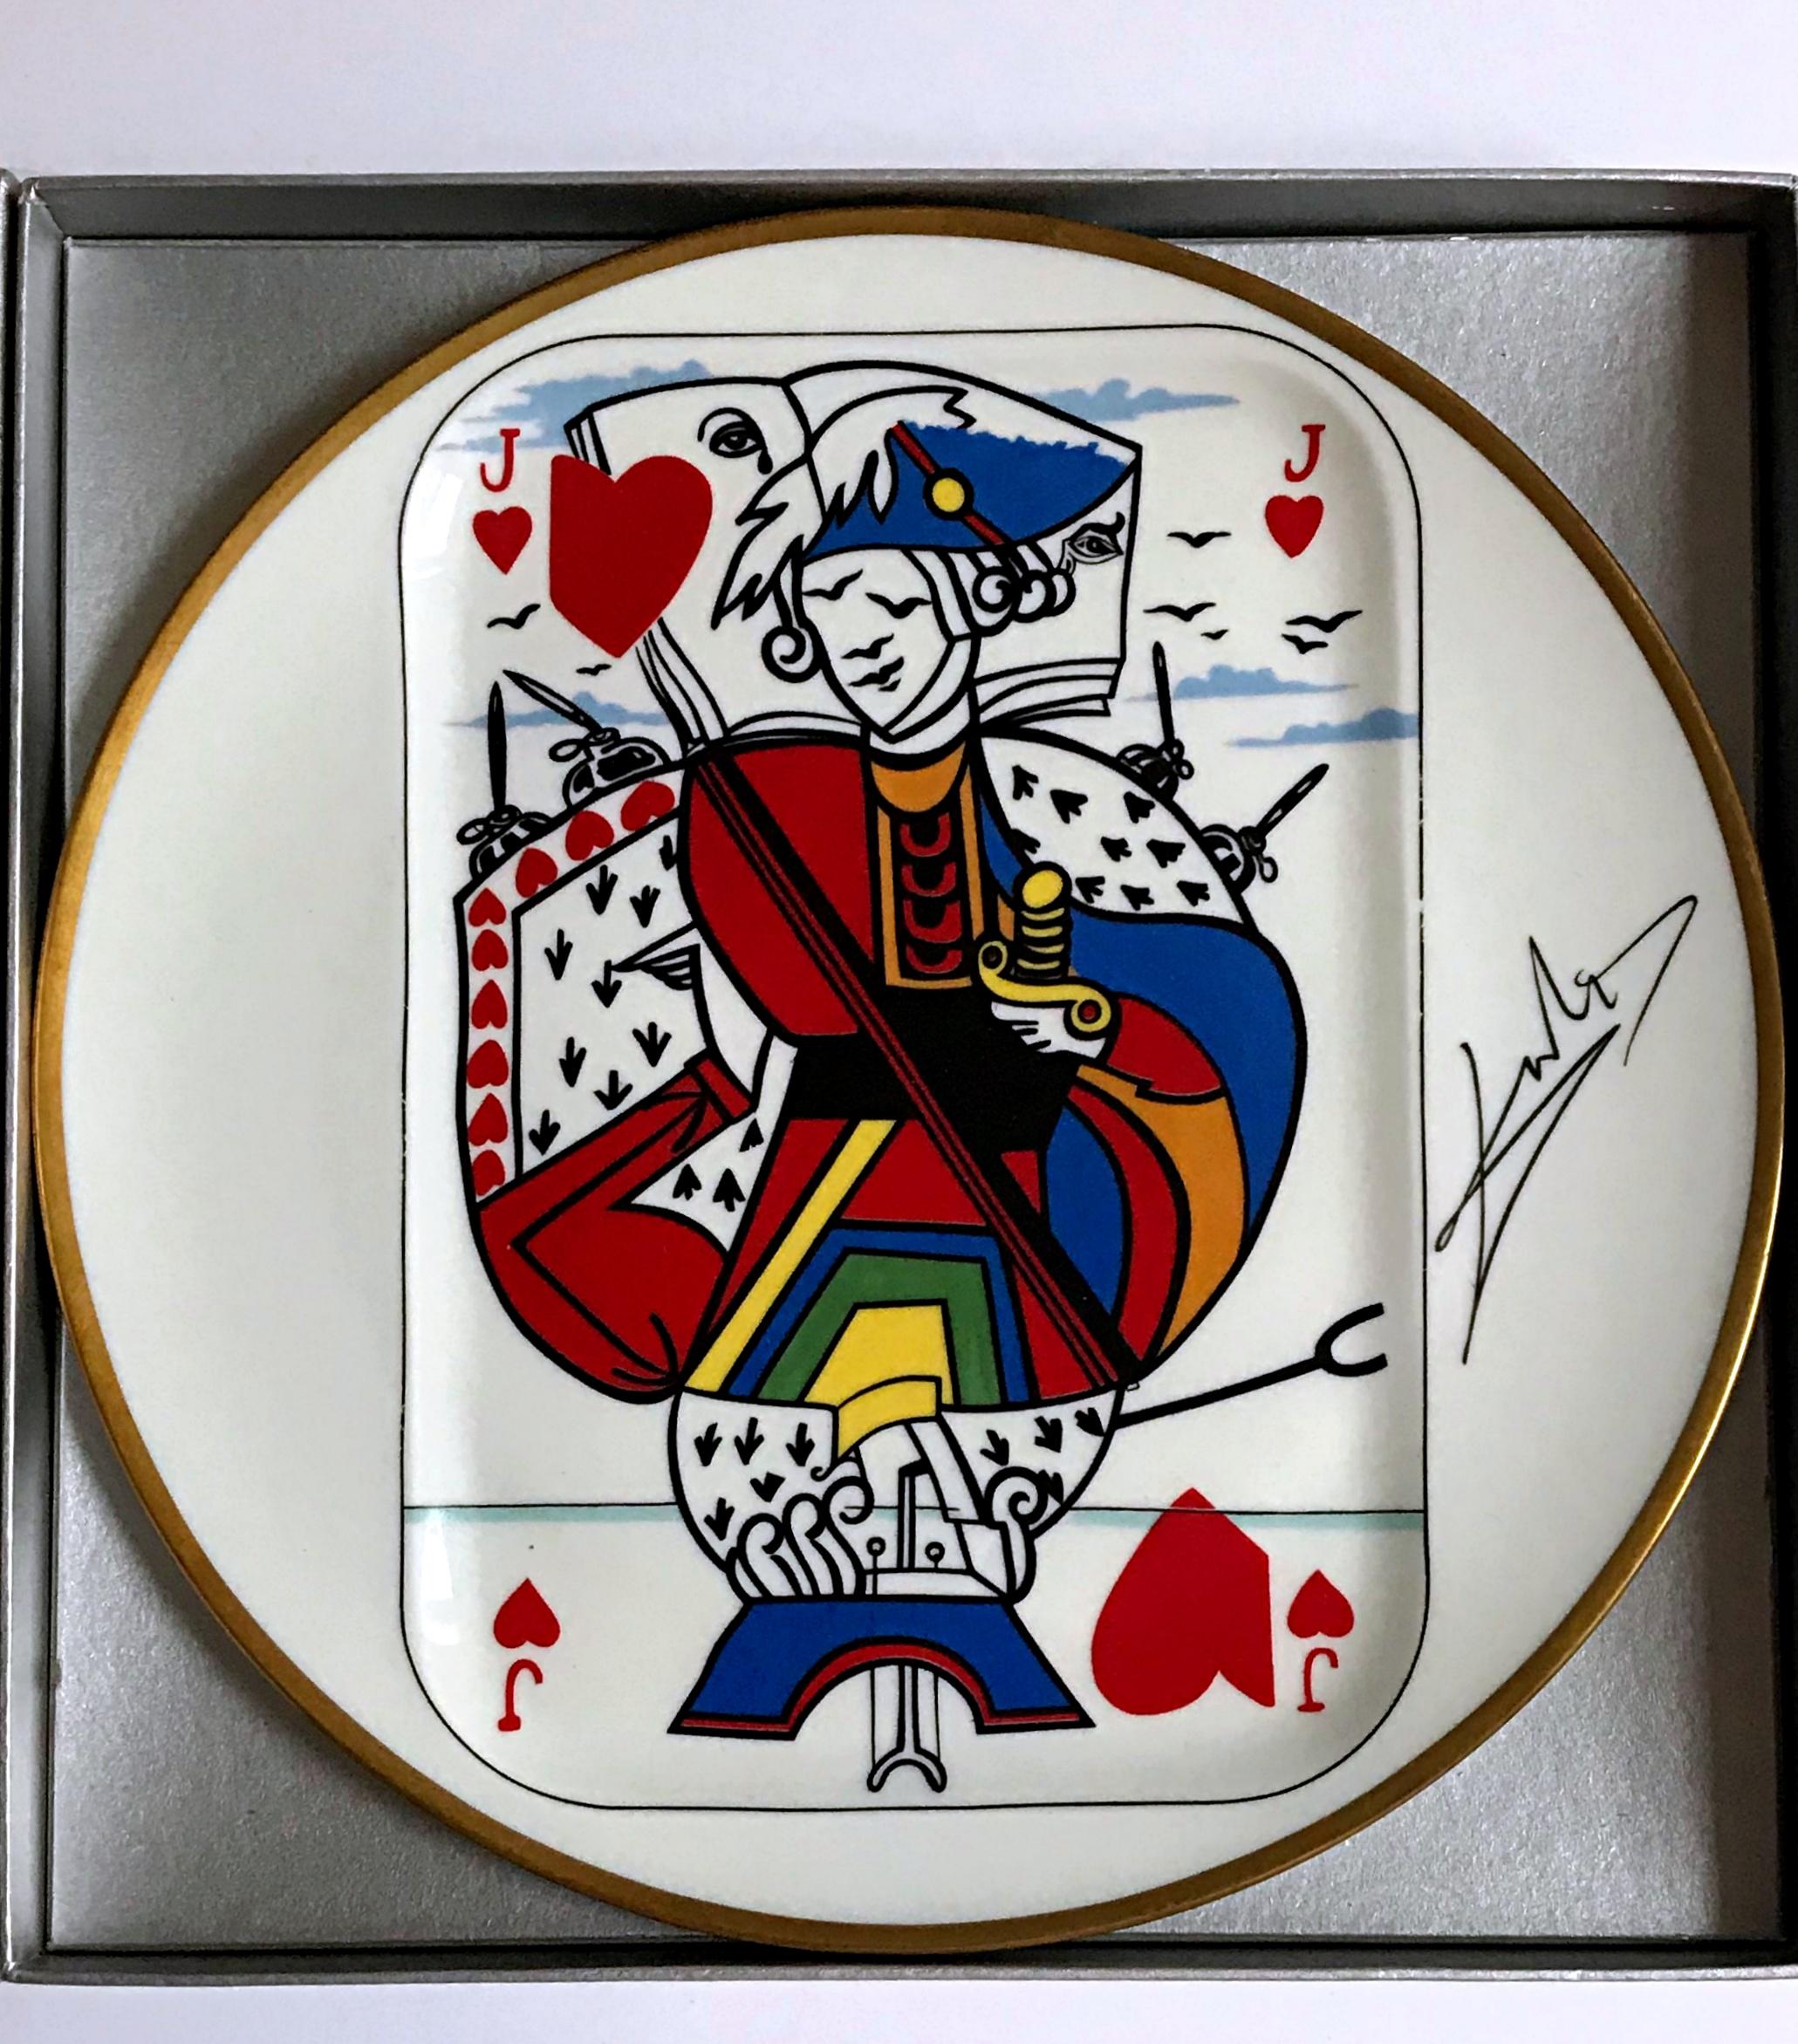 Jack of Hearts - limited edition porcelain plate made in France  - Sculpture by Salvador Dalí